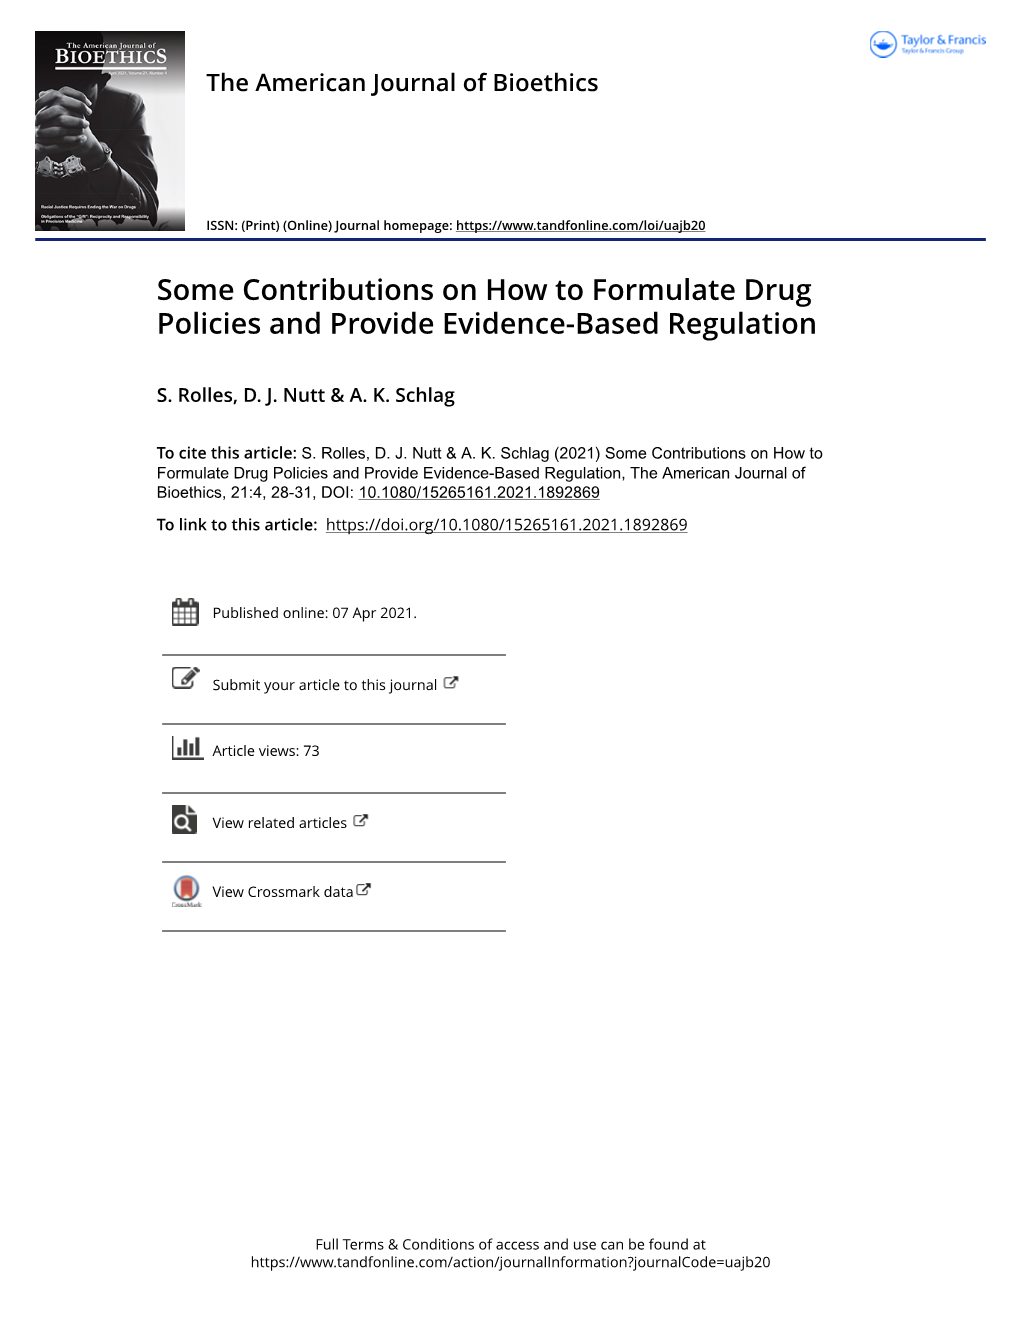 Some Contributions on How to Formulate Drug Policies and Provide Evidence-Based Regulation